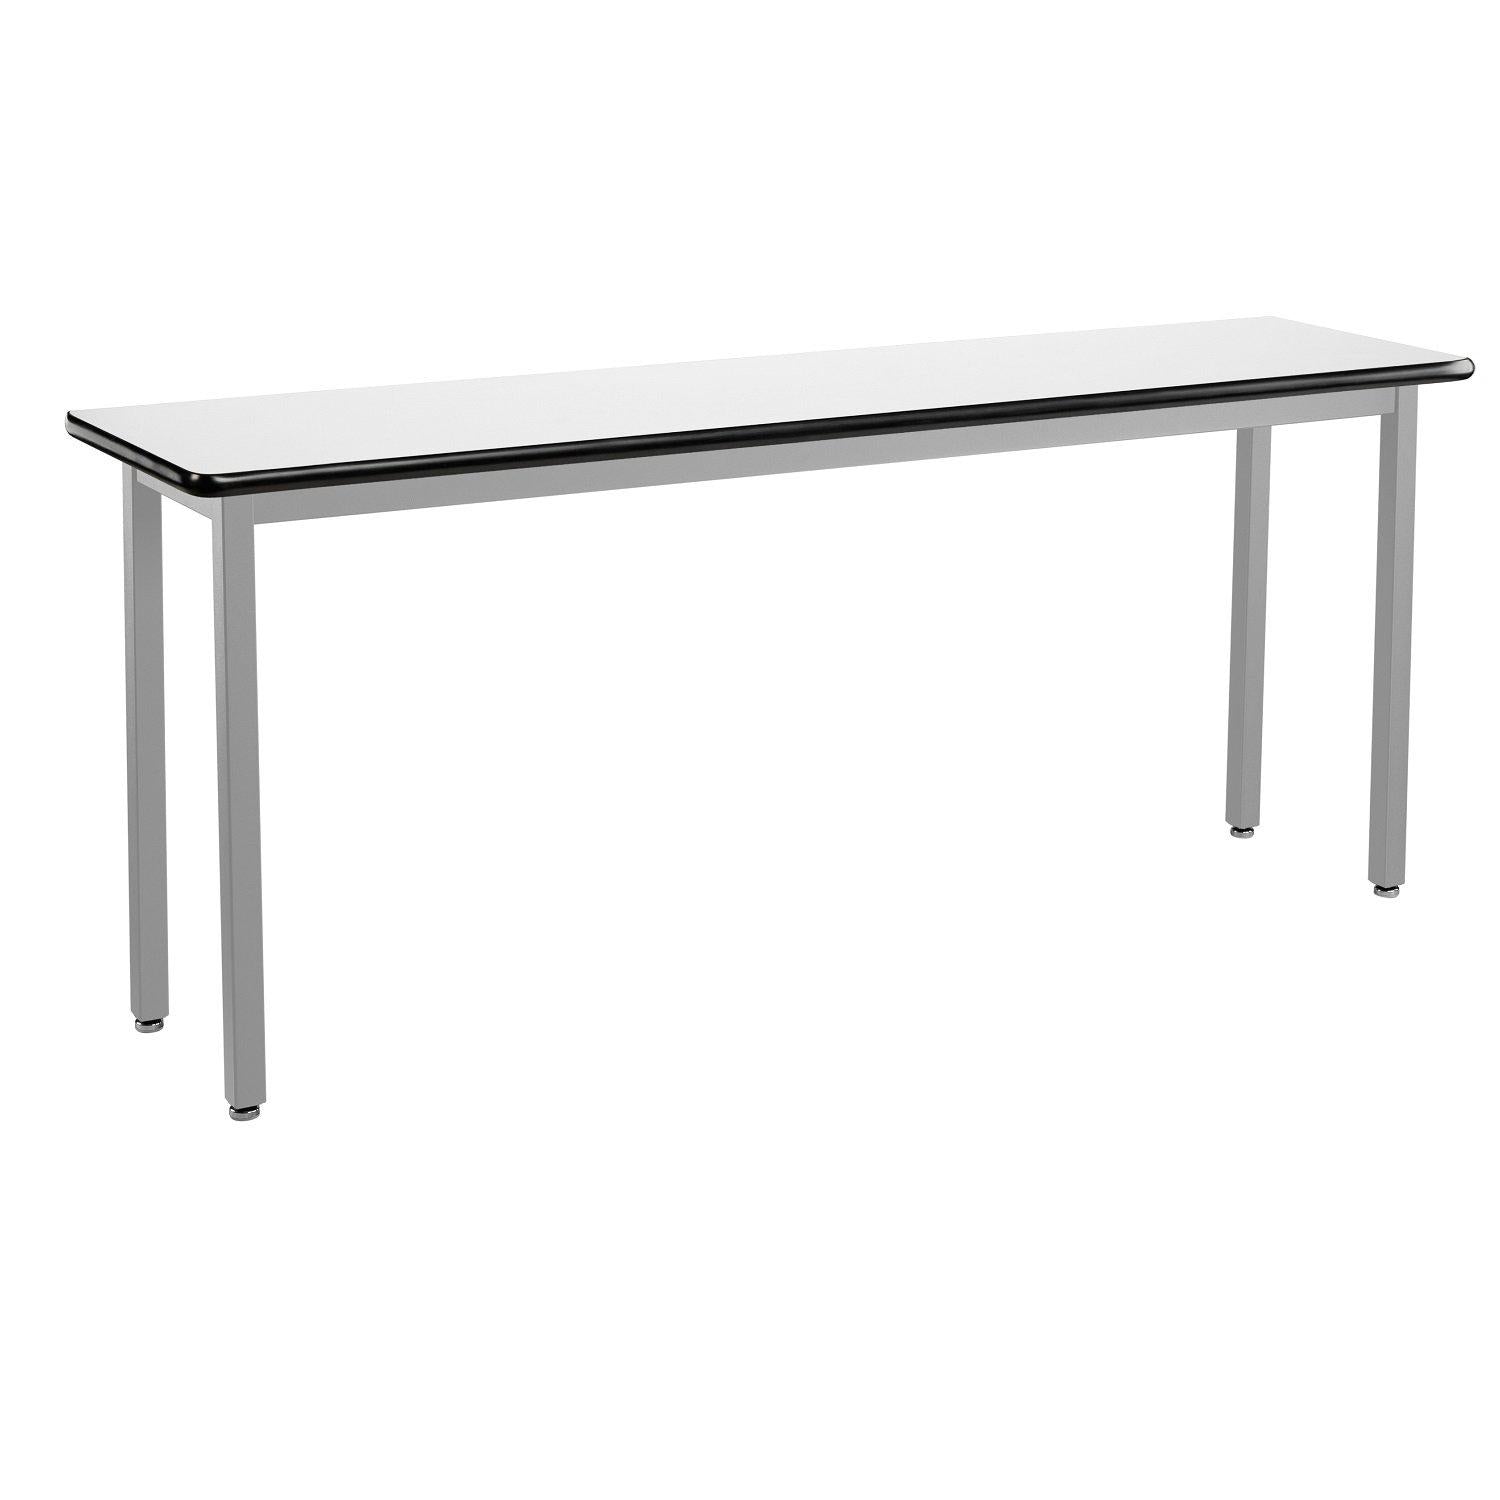 Heavy-Duty Fixed Height Utility Table, Soft Grey Frame, 18" x 84", Whiteboard High-Pressure Laminate Top